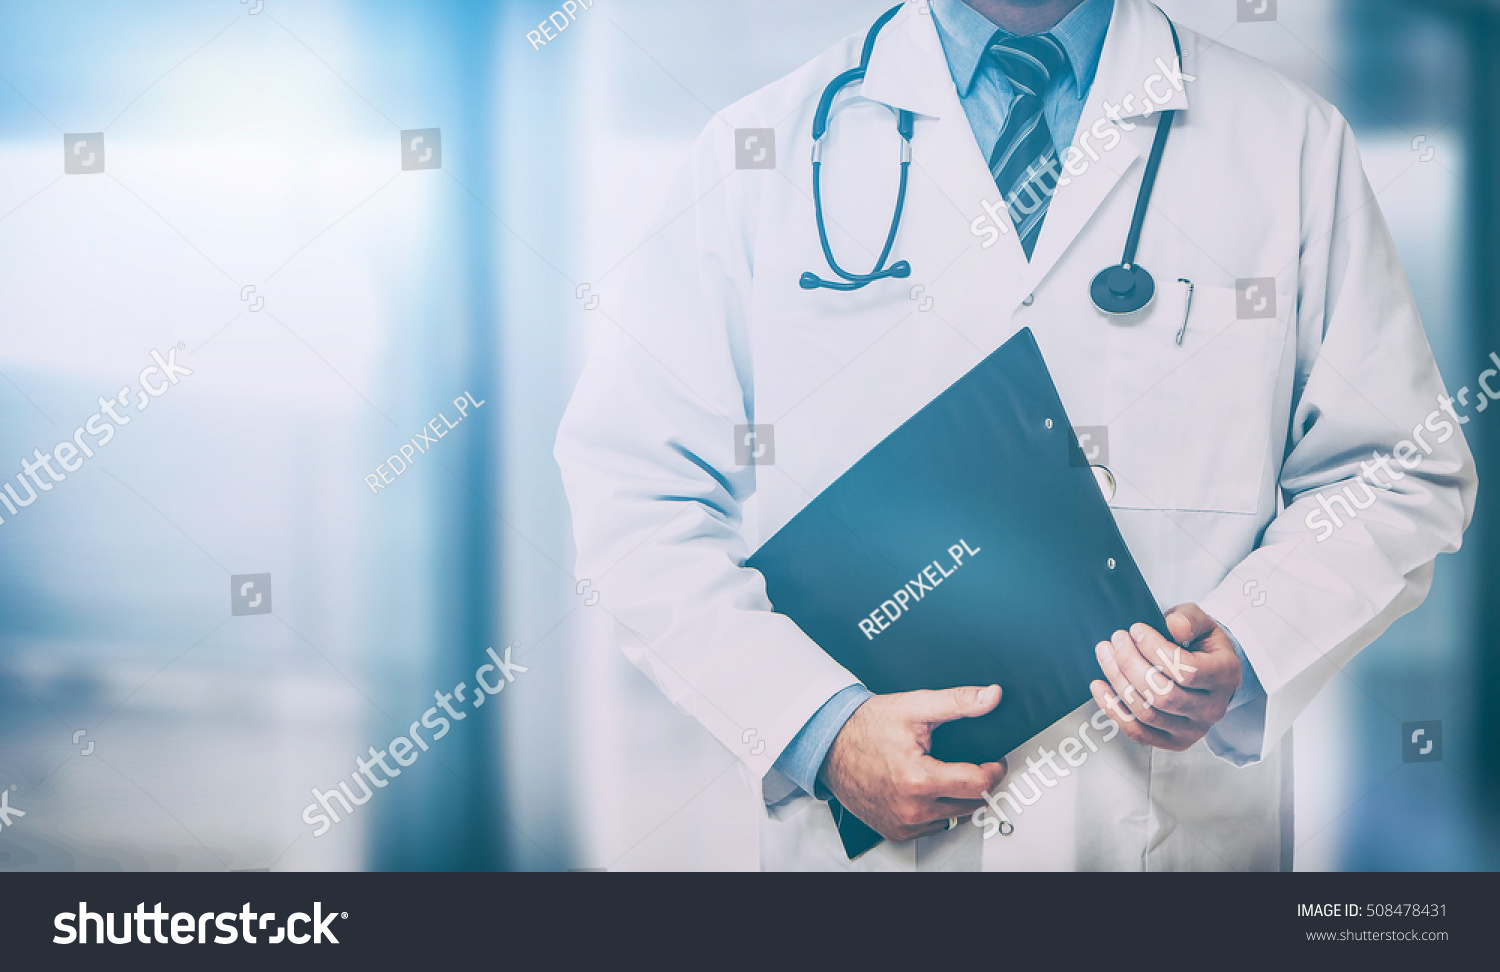 doctor doctoring clinic medicine cardiologist patient health background concept - stock image #508478431